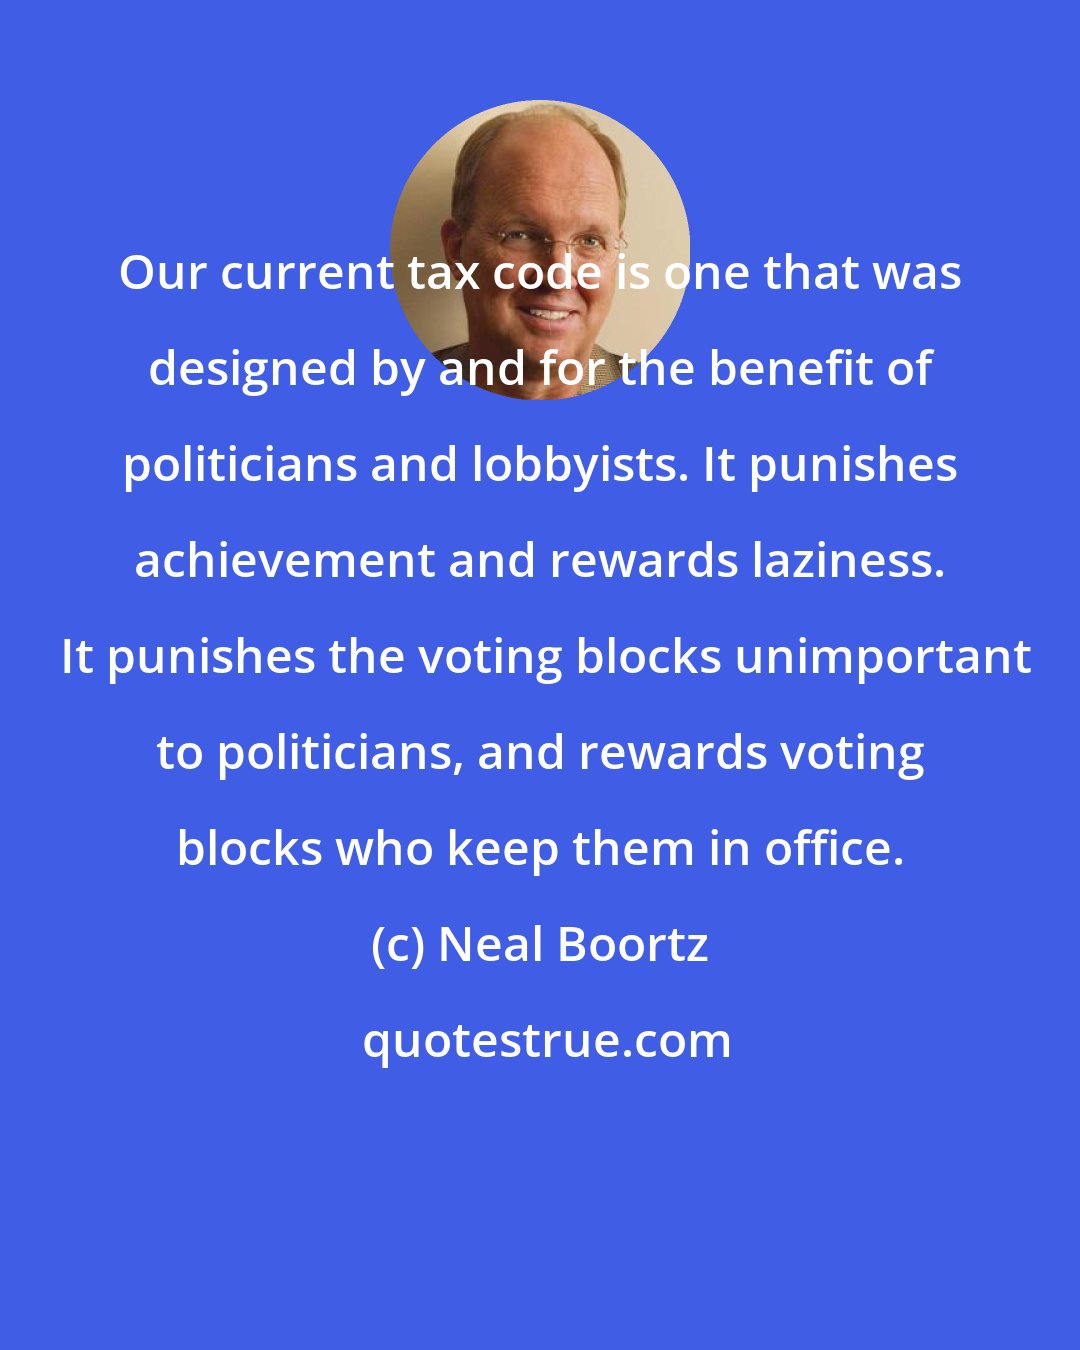 Neal Boortz: Our current tax code is one that was designed by and for the benefit of politicians and lobbyists. It punishes achievement and rewards laziness.  It punishes the voting blocks unimportant to politicians, and rewards voting blocks who keep them in office.